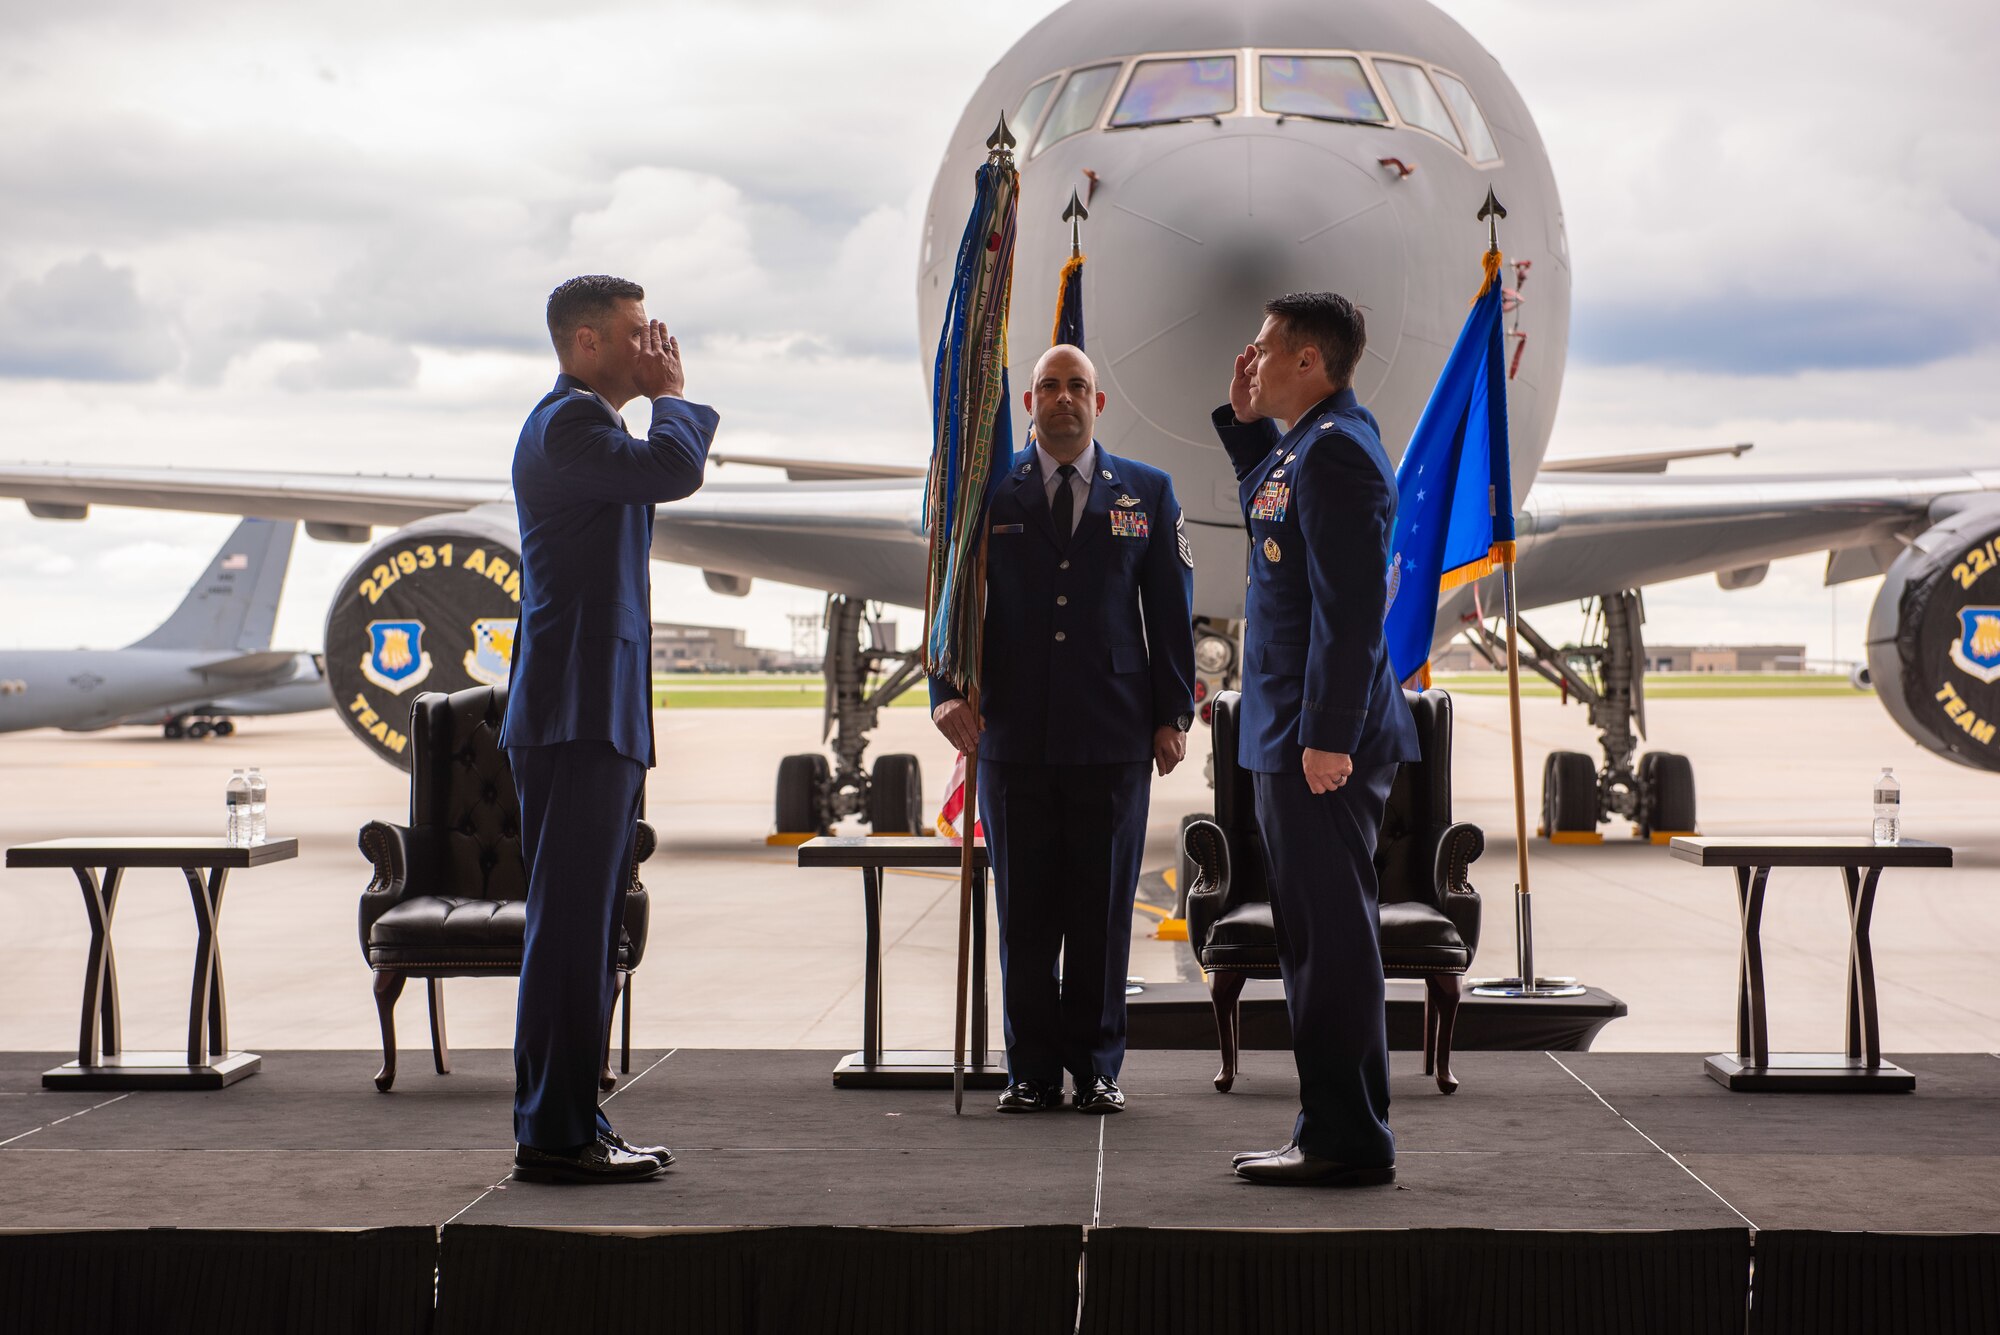 Lt. Col. Wesley Spurlock, right, relinquishes command of the 344th Air Refueling Squadron during a change of command ceremony May 27, 2020, at McConnell Air Force Base, Kansas. Spurlock led the 344th during its reorganization, introducing aircrew from many different airframes to the KC-46A Pegasus, the newest airframe to the Air Force’s air refueling inventory. (U.S. Air Force photo by Staff Sgt. Chris Thornbury)